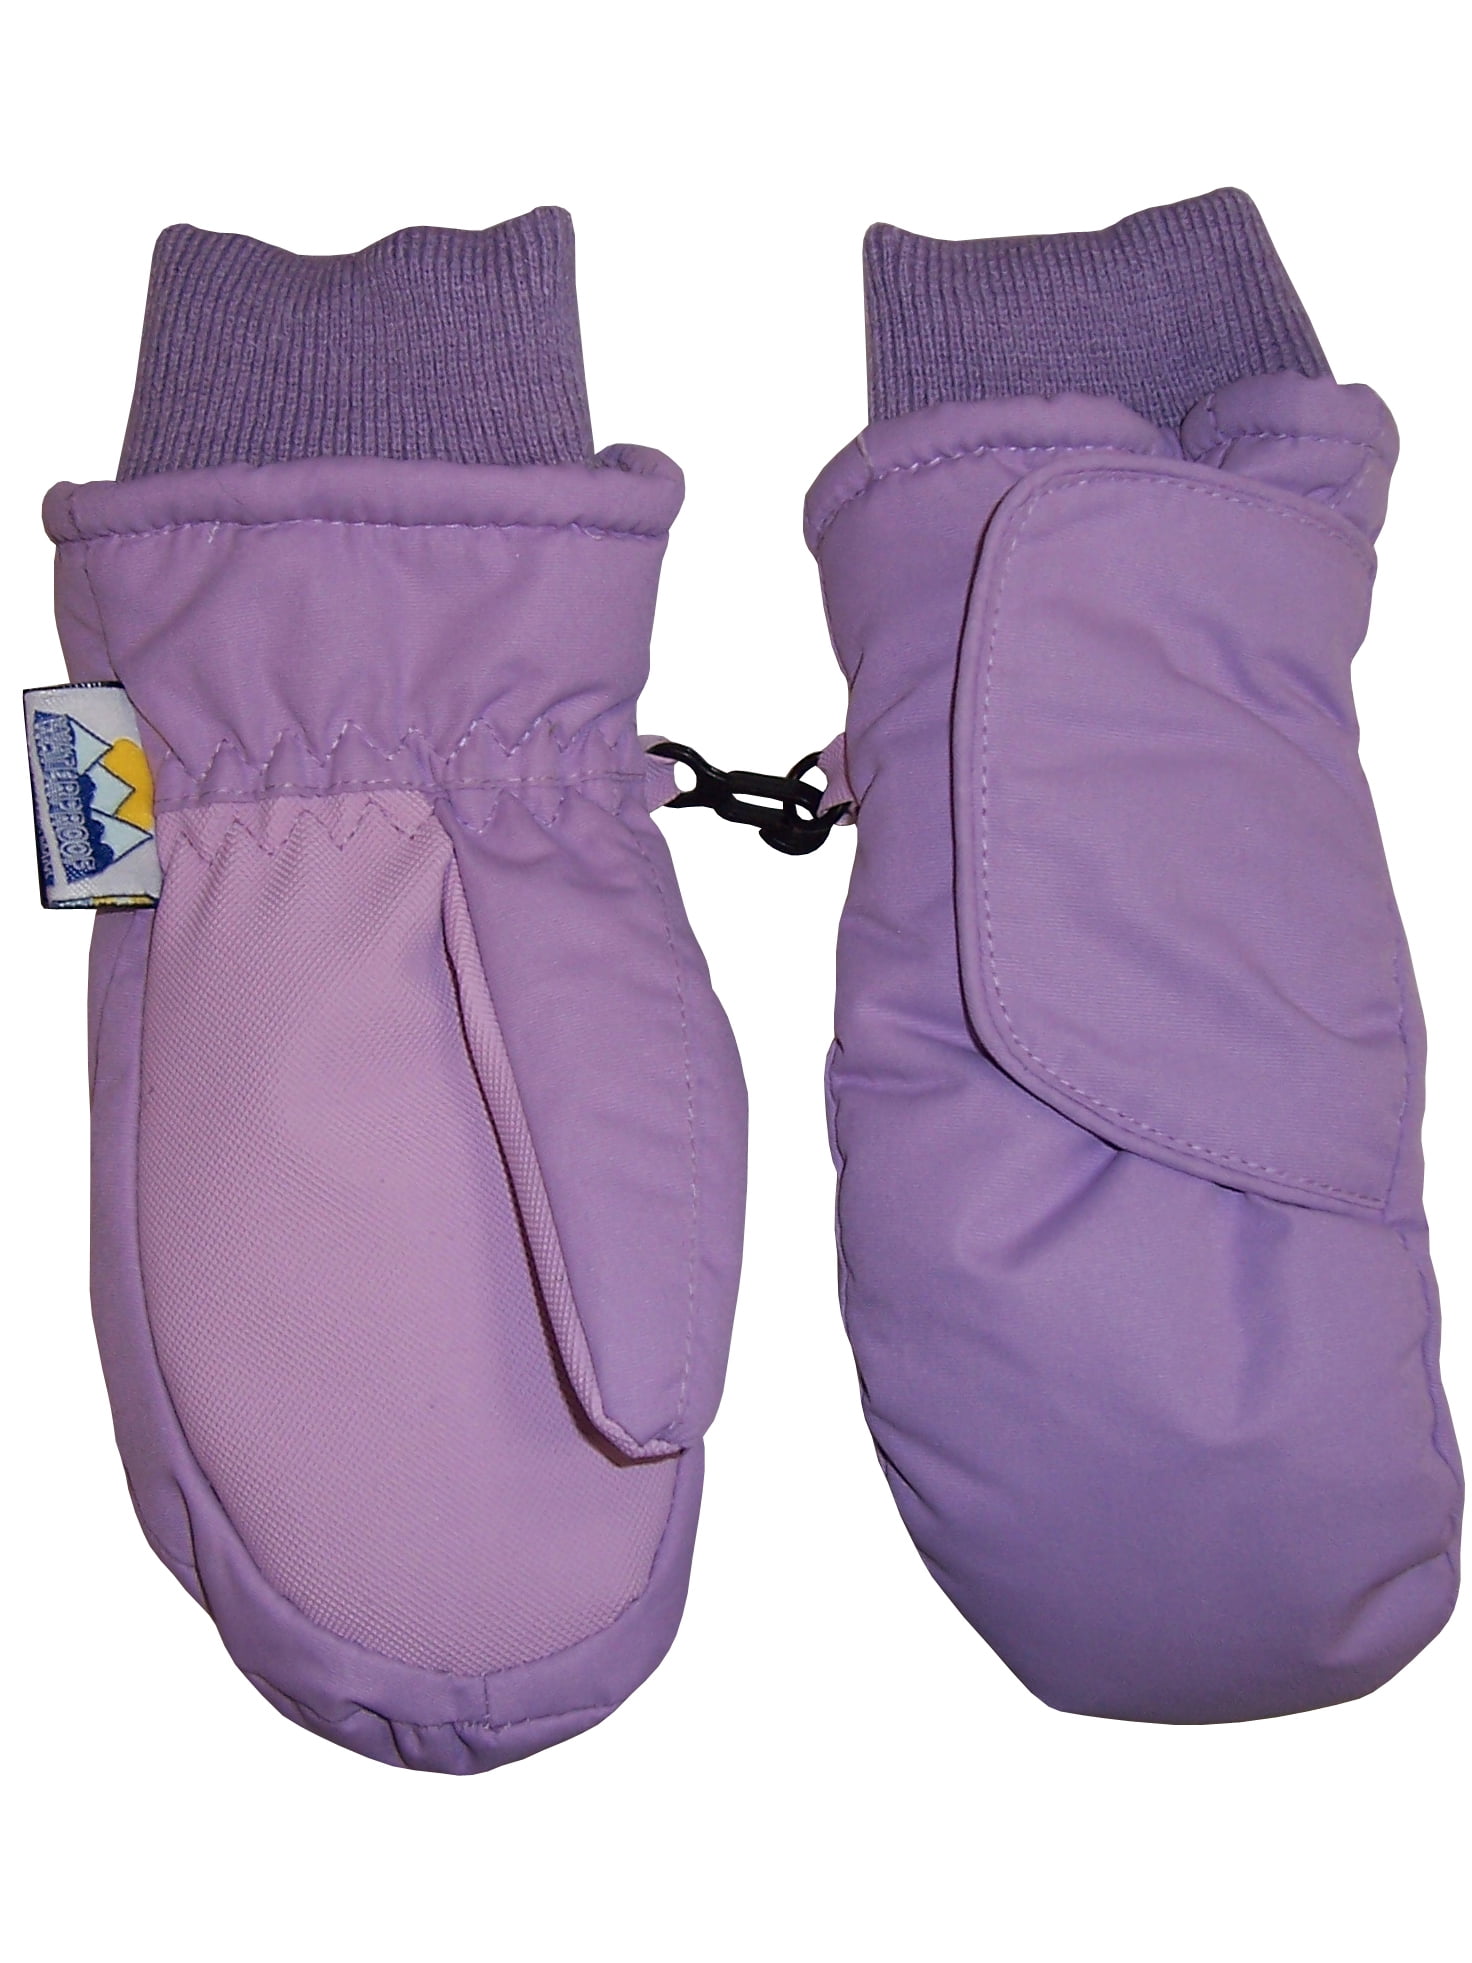 N'Ice Caps Kids Toddler Baby Easy-On Wrap Waterproof Thinsulate Winter Mittens